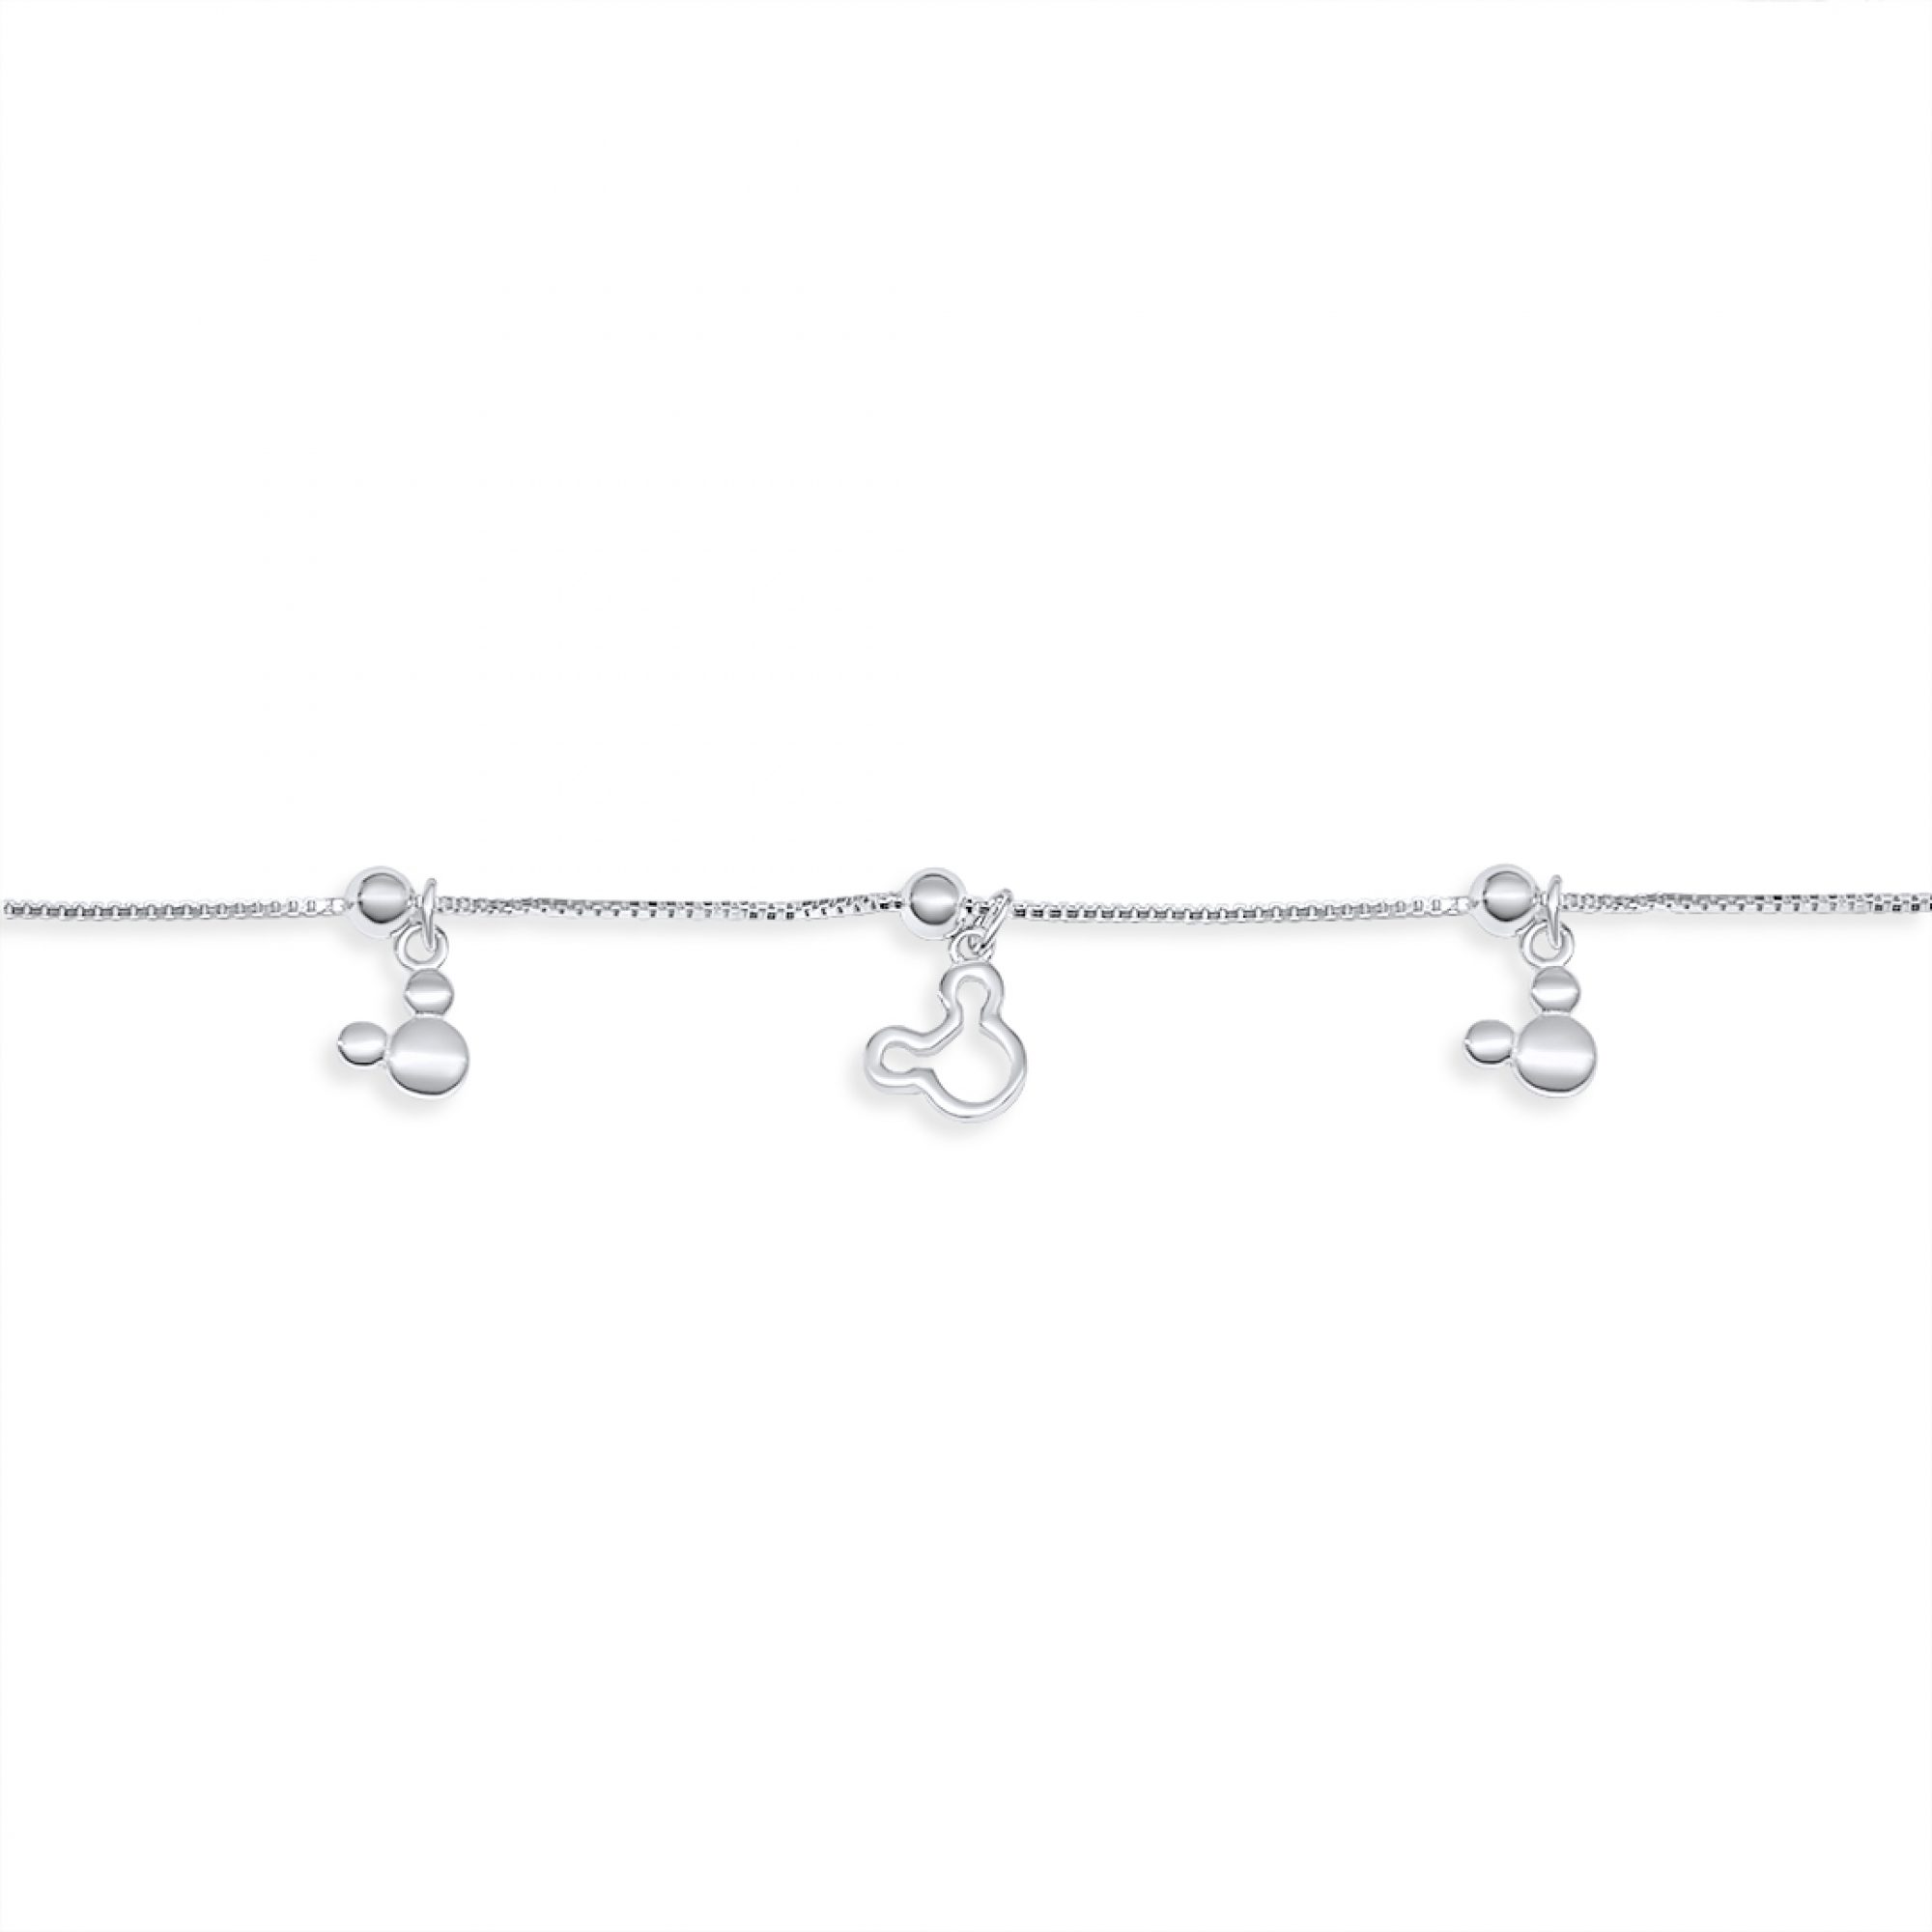 Anklet with dangles